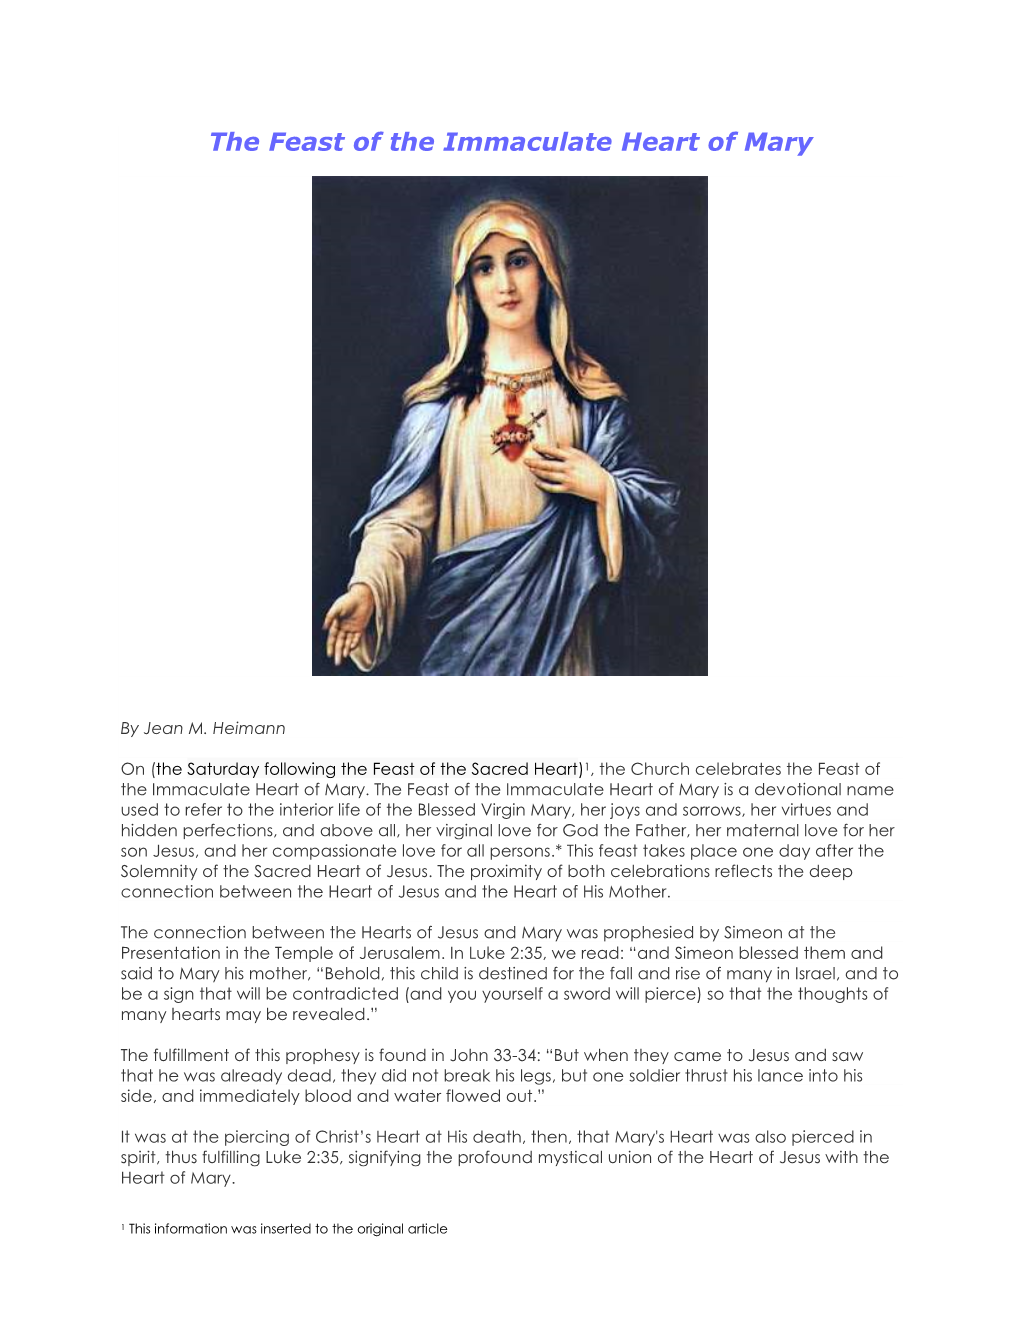 The Feast of the Immaculate Heart of Mary